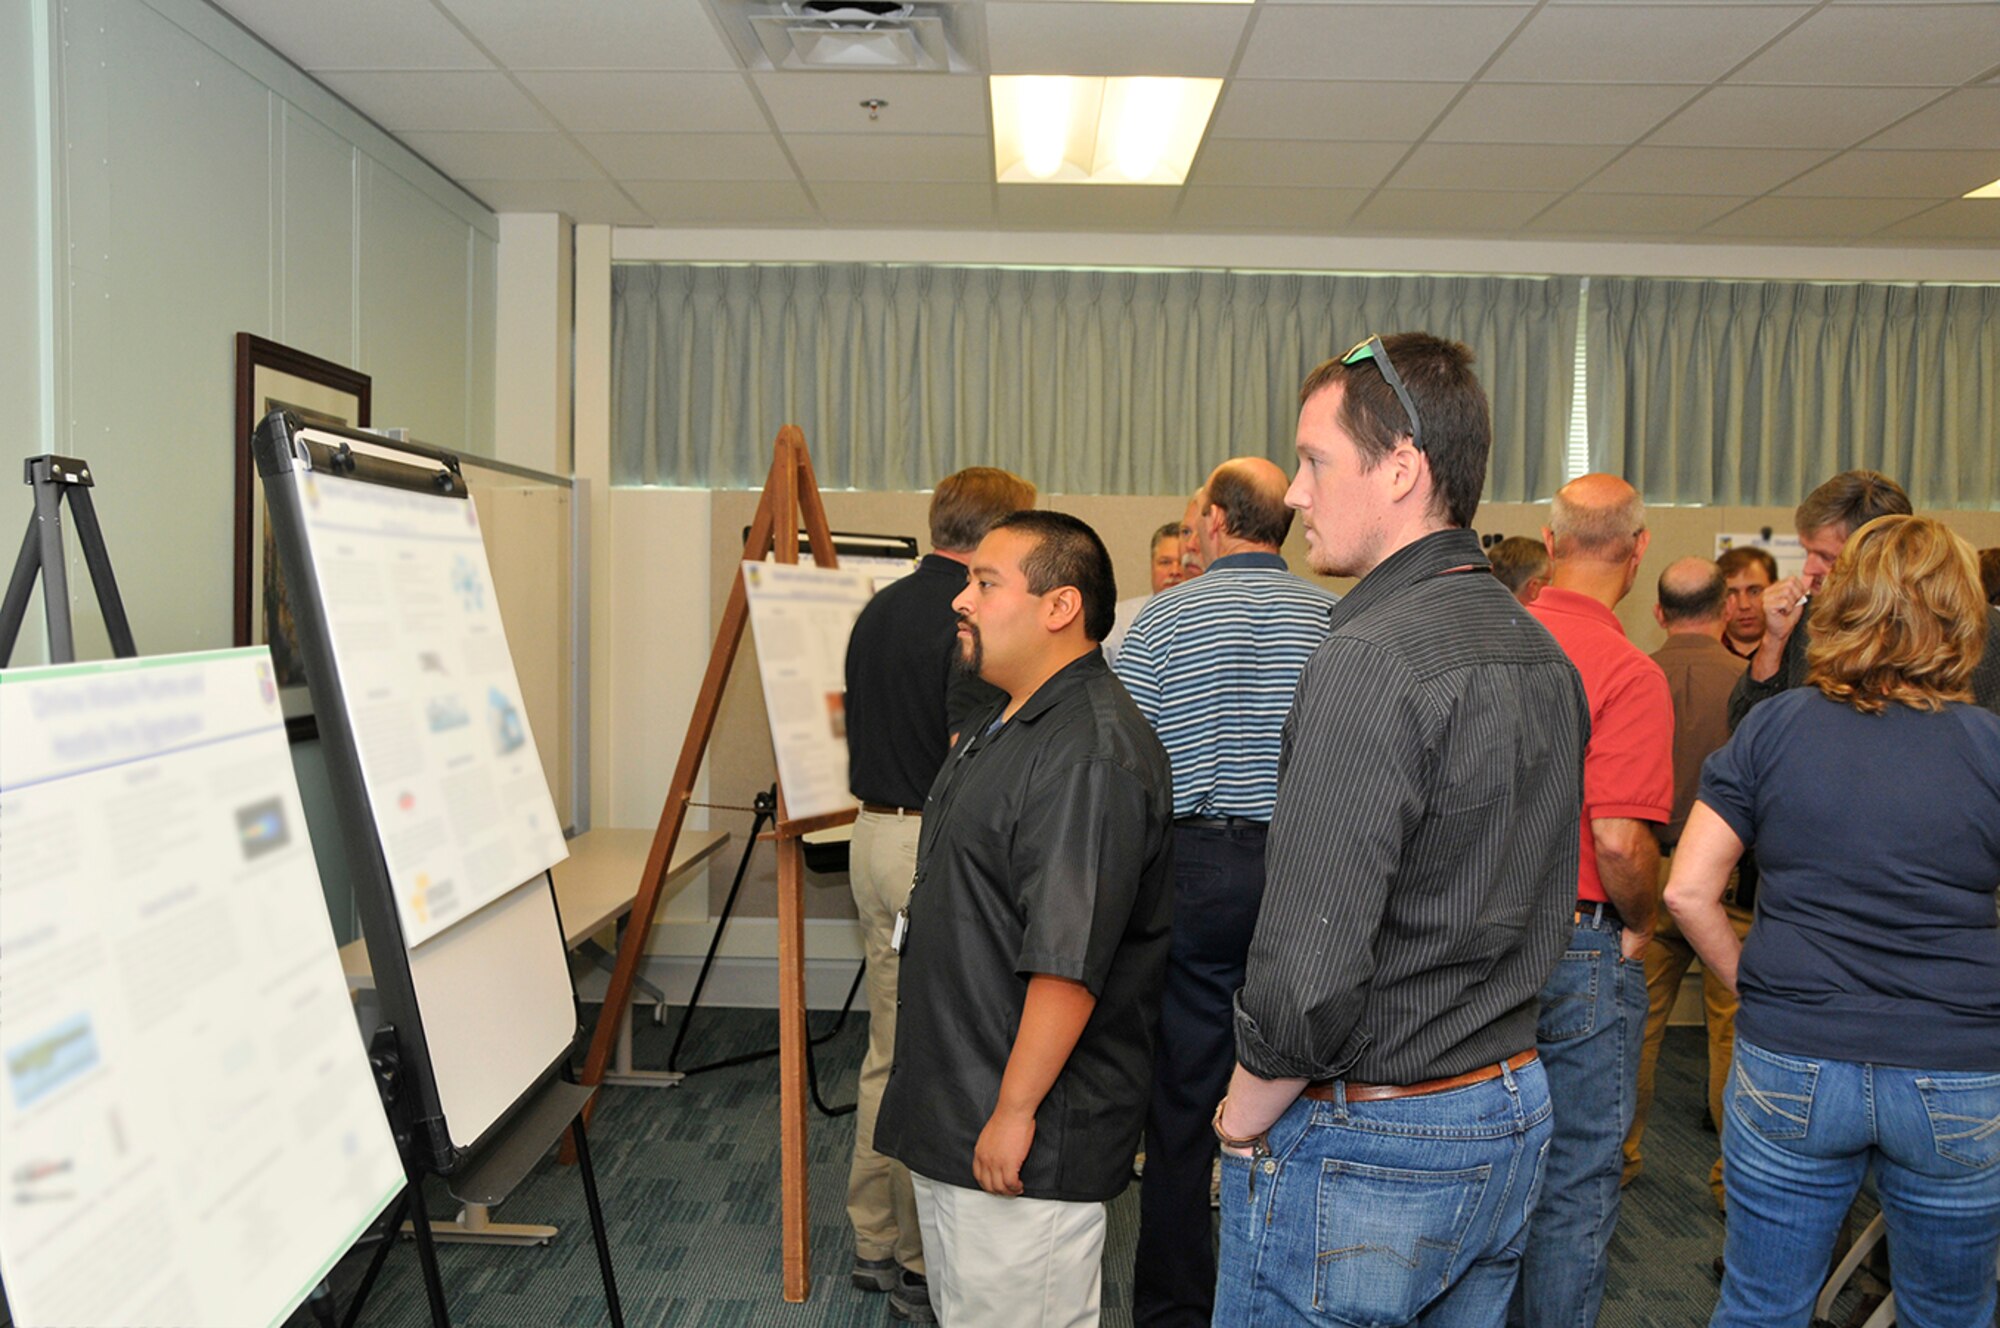 AEDC personnel view ATA Innovation Grant ideas during the recent AEDC Technical Excellence Seminar Poster Session. (Photo by Jacqueline Cowan)